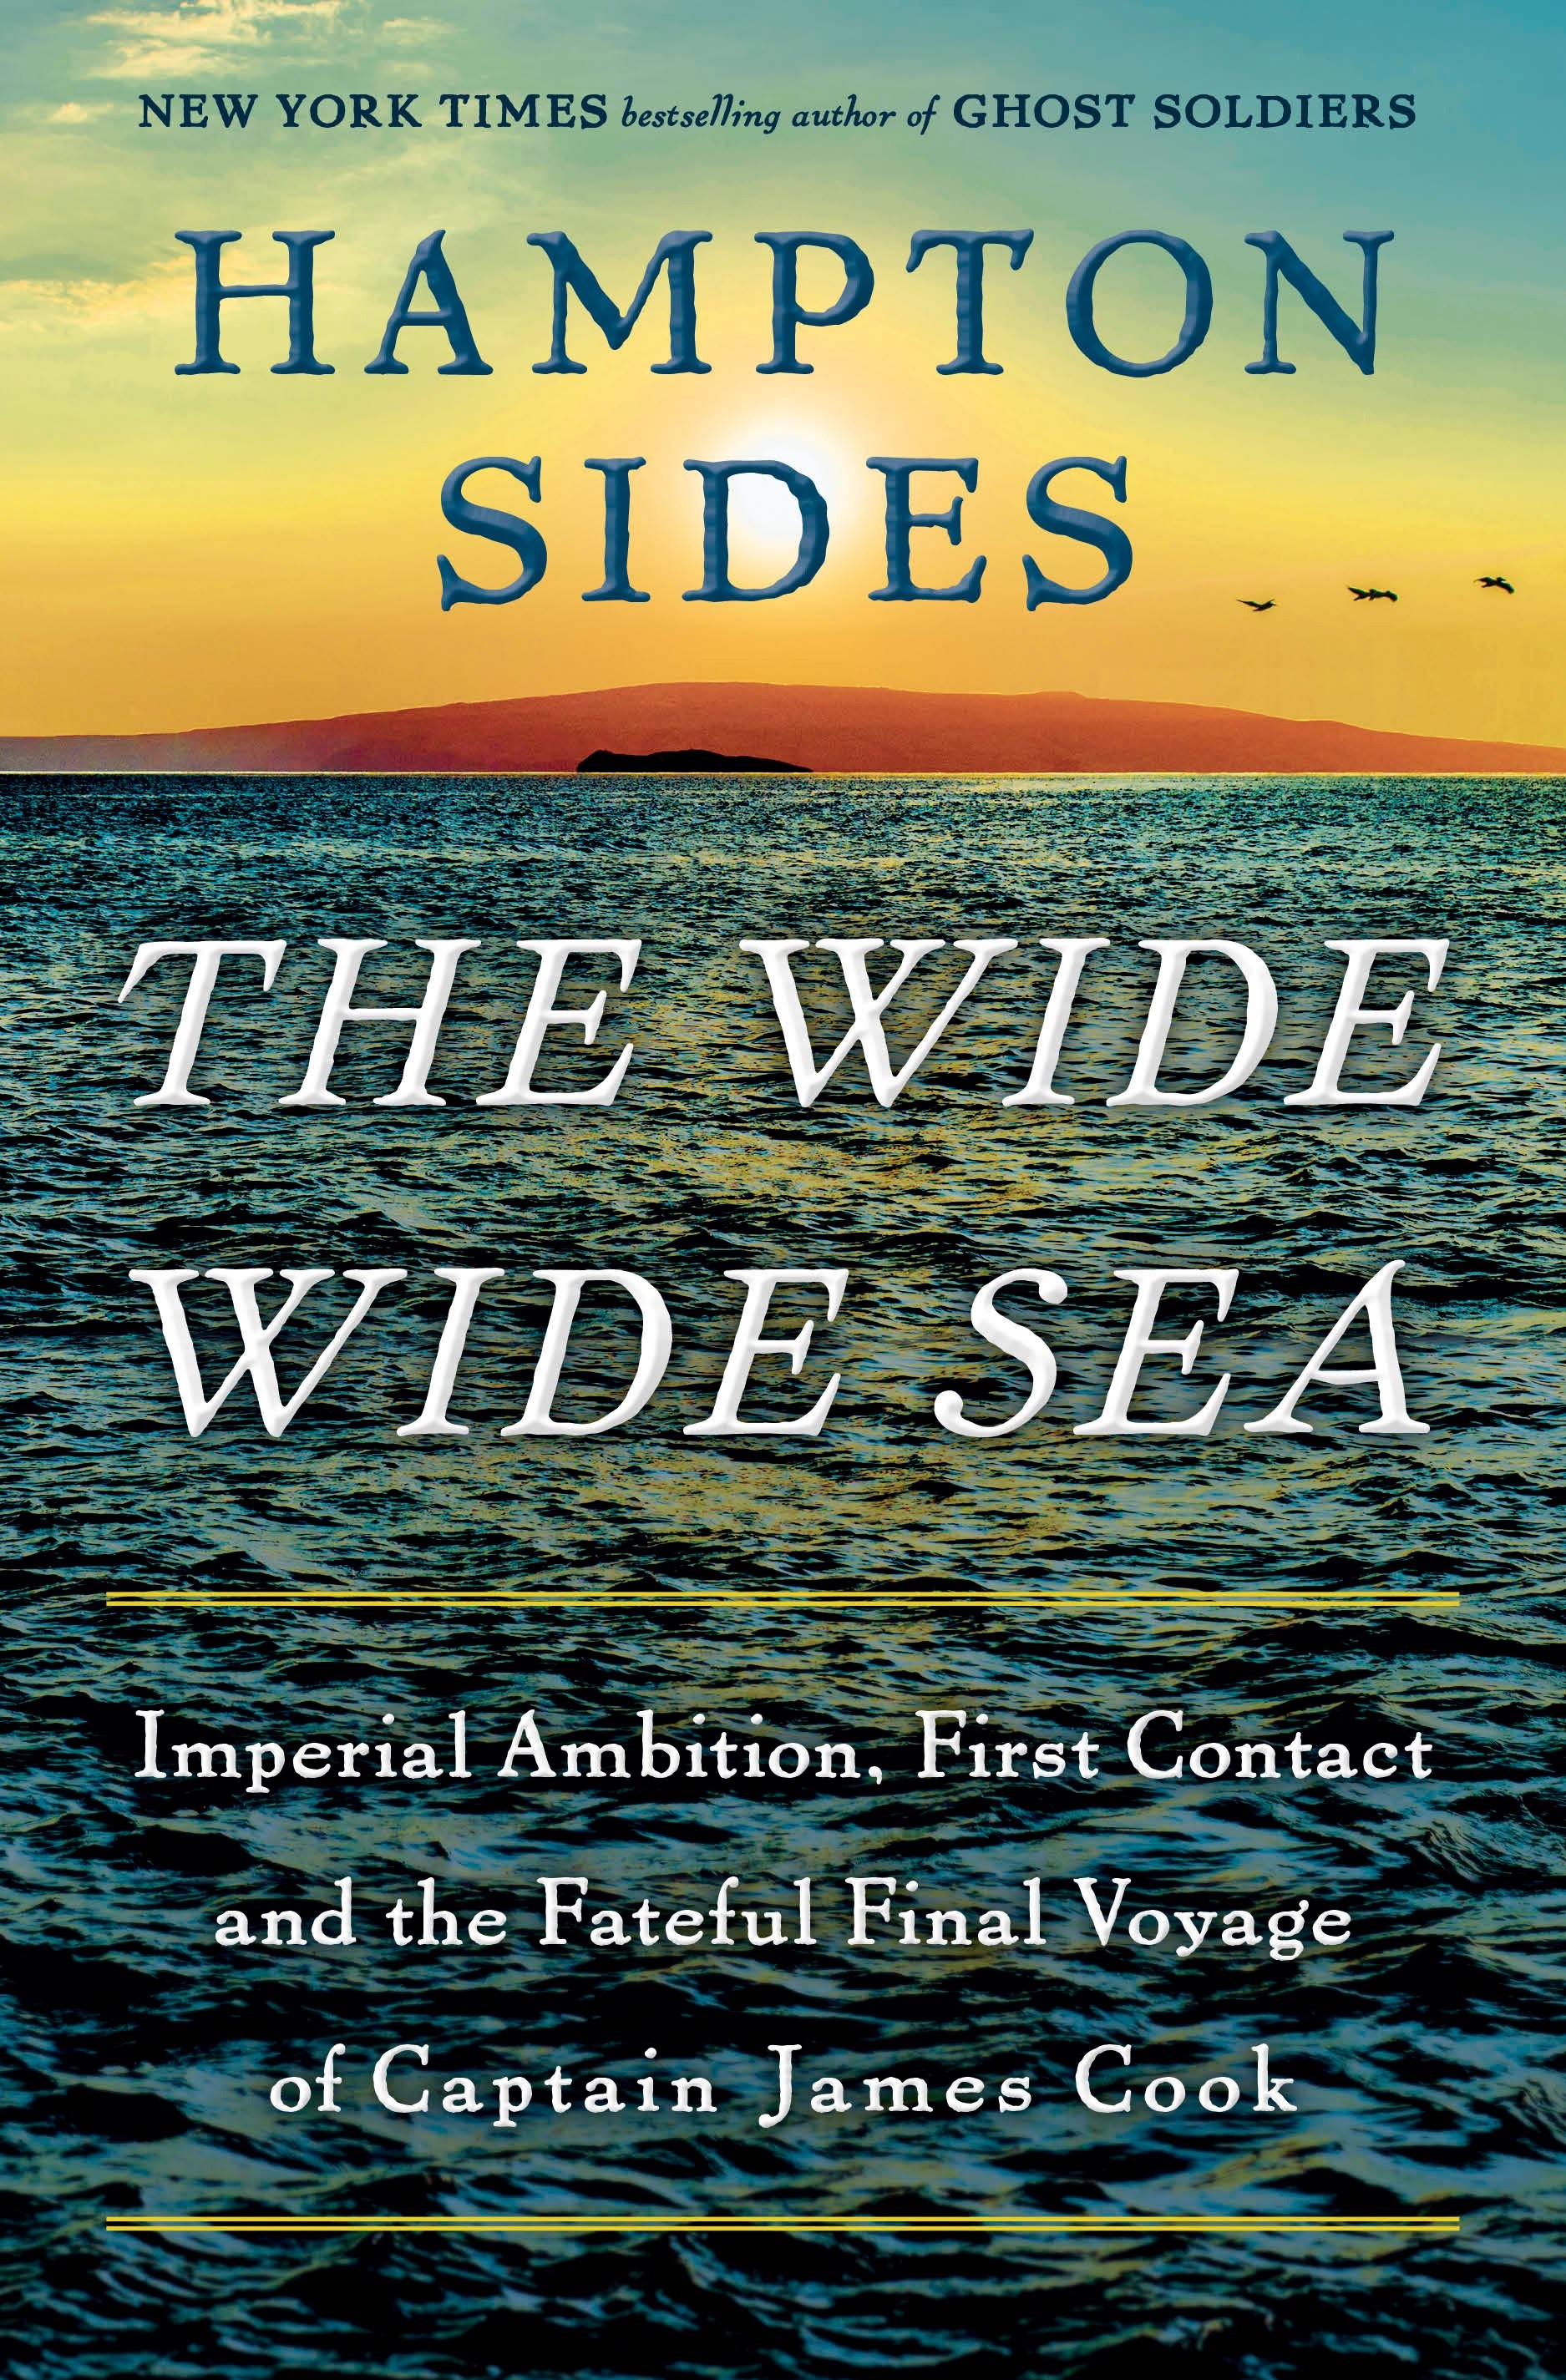 book jacket with a photo of the open sea